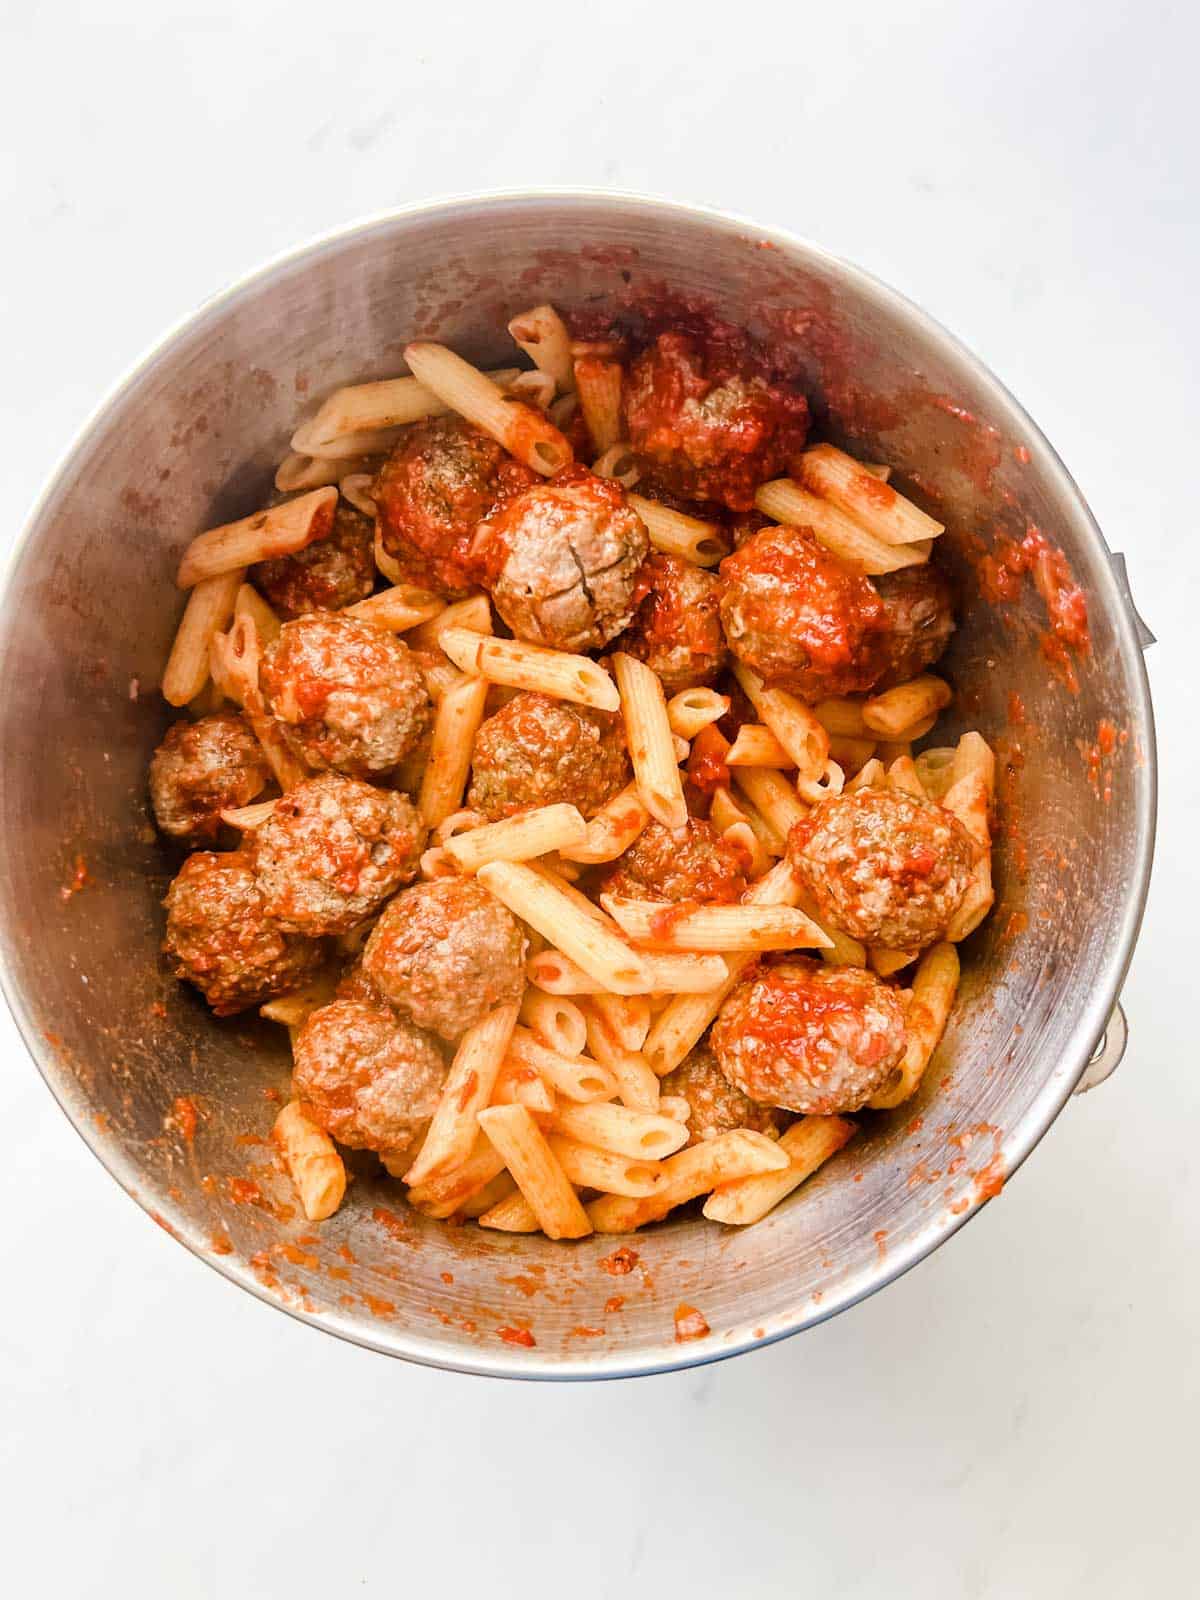 Photo of meatballs and penne in a casserole dish.